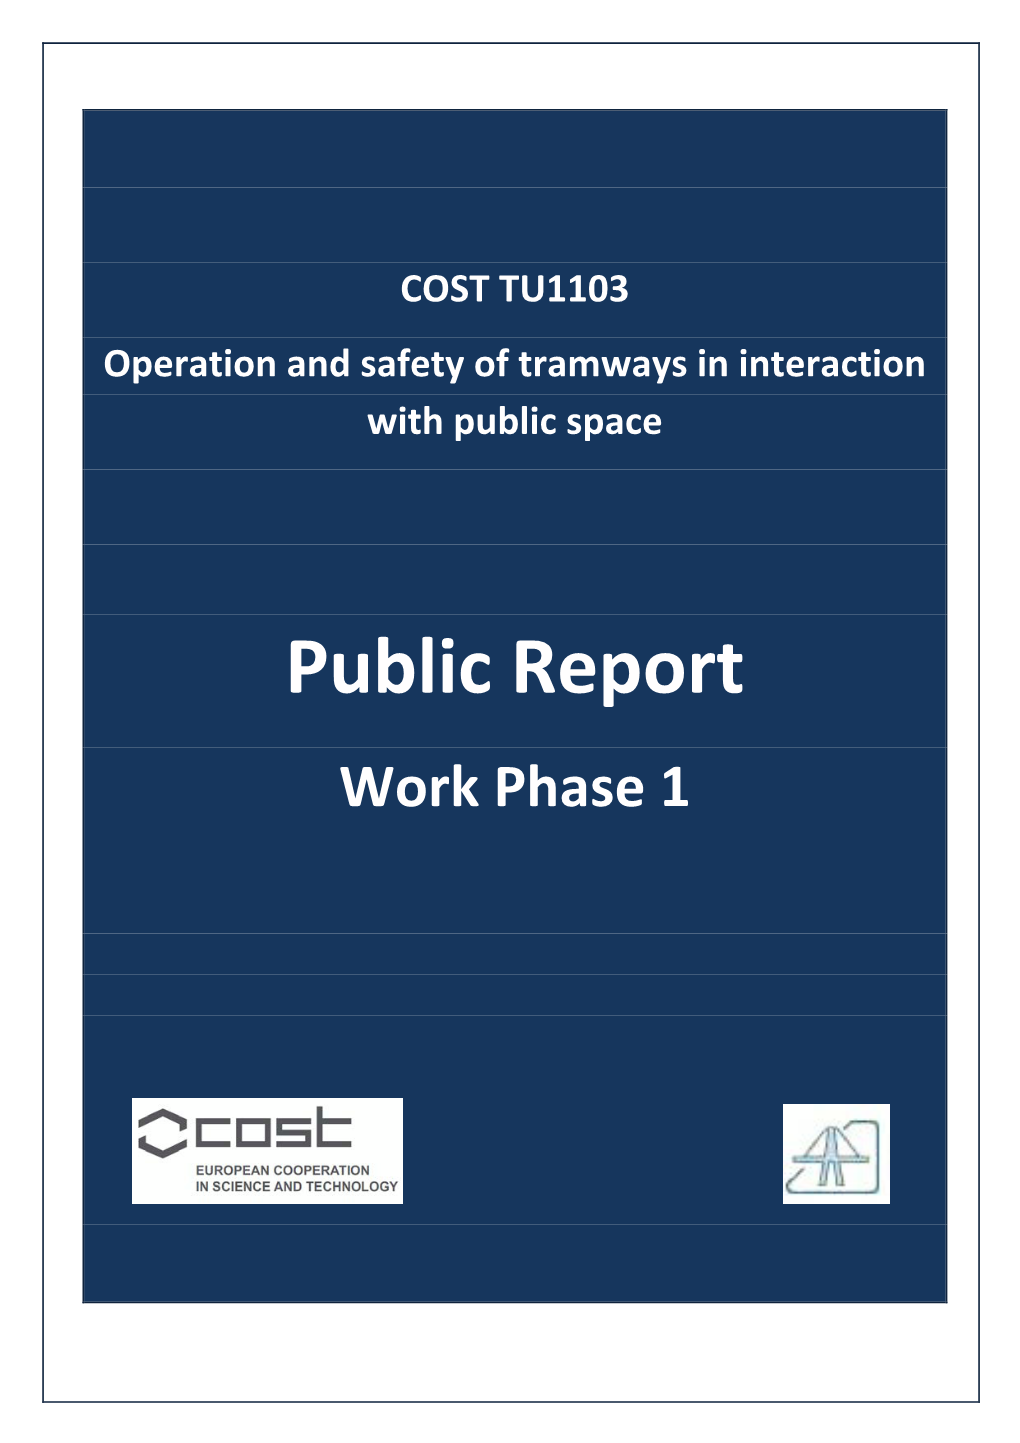 Public Report Work Phase 1